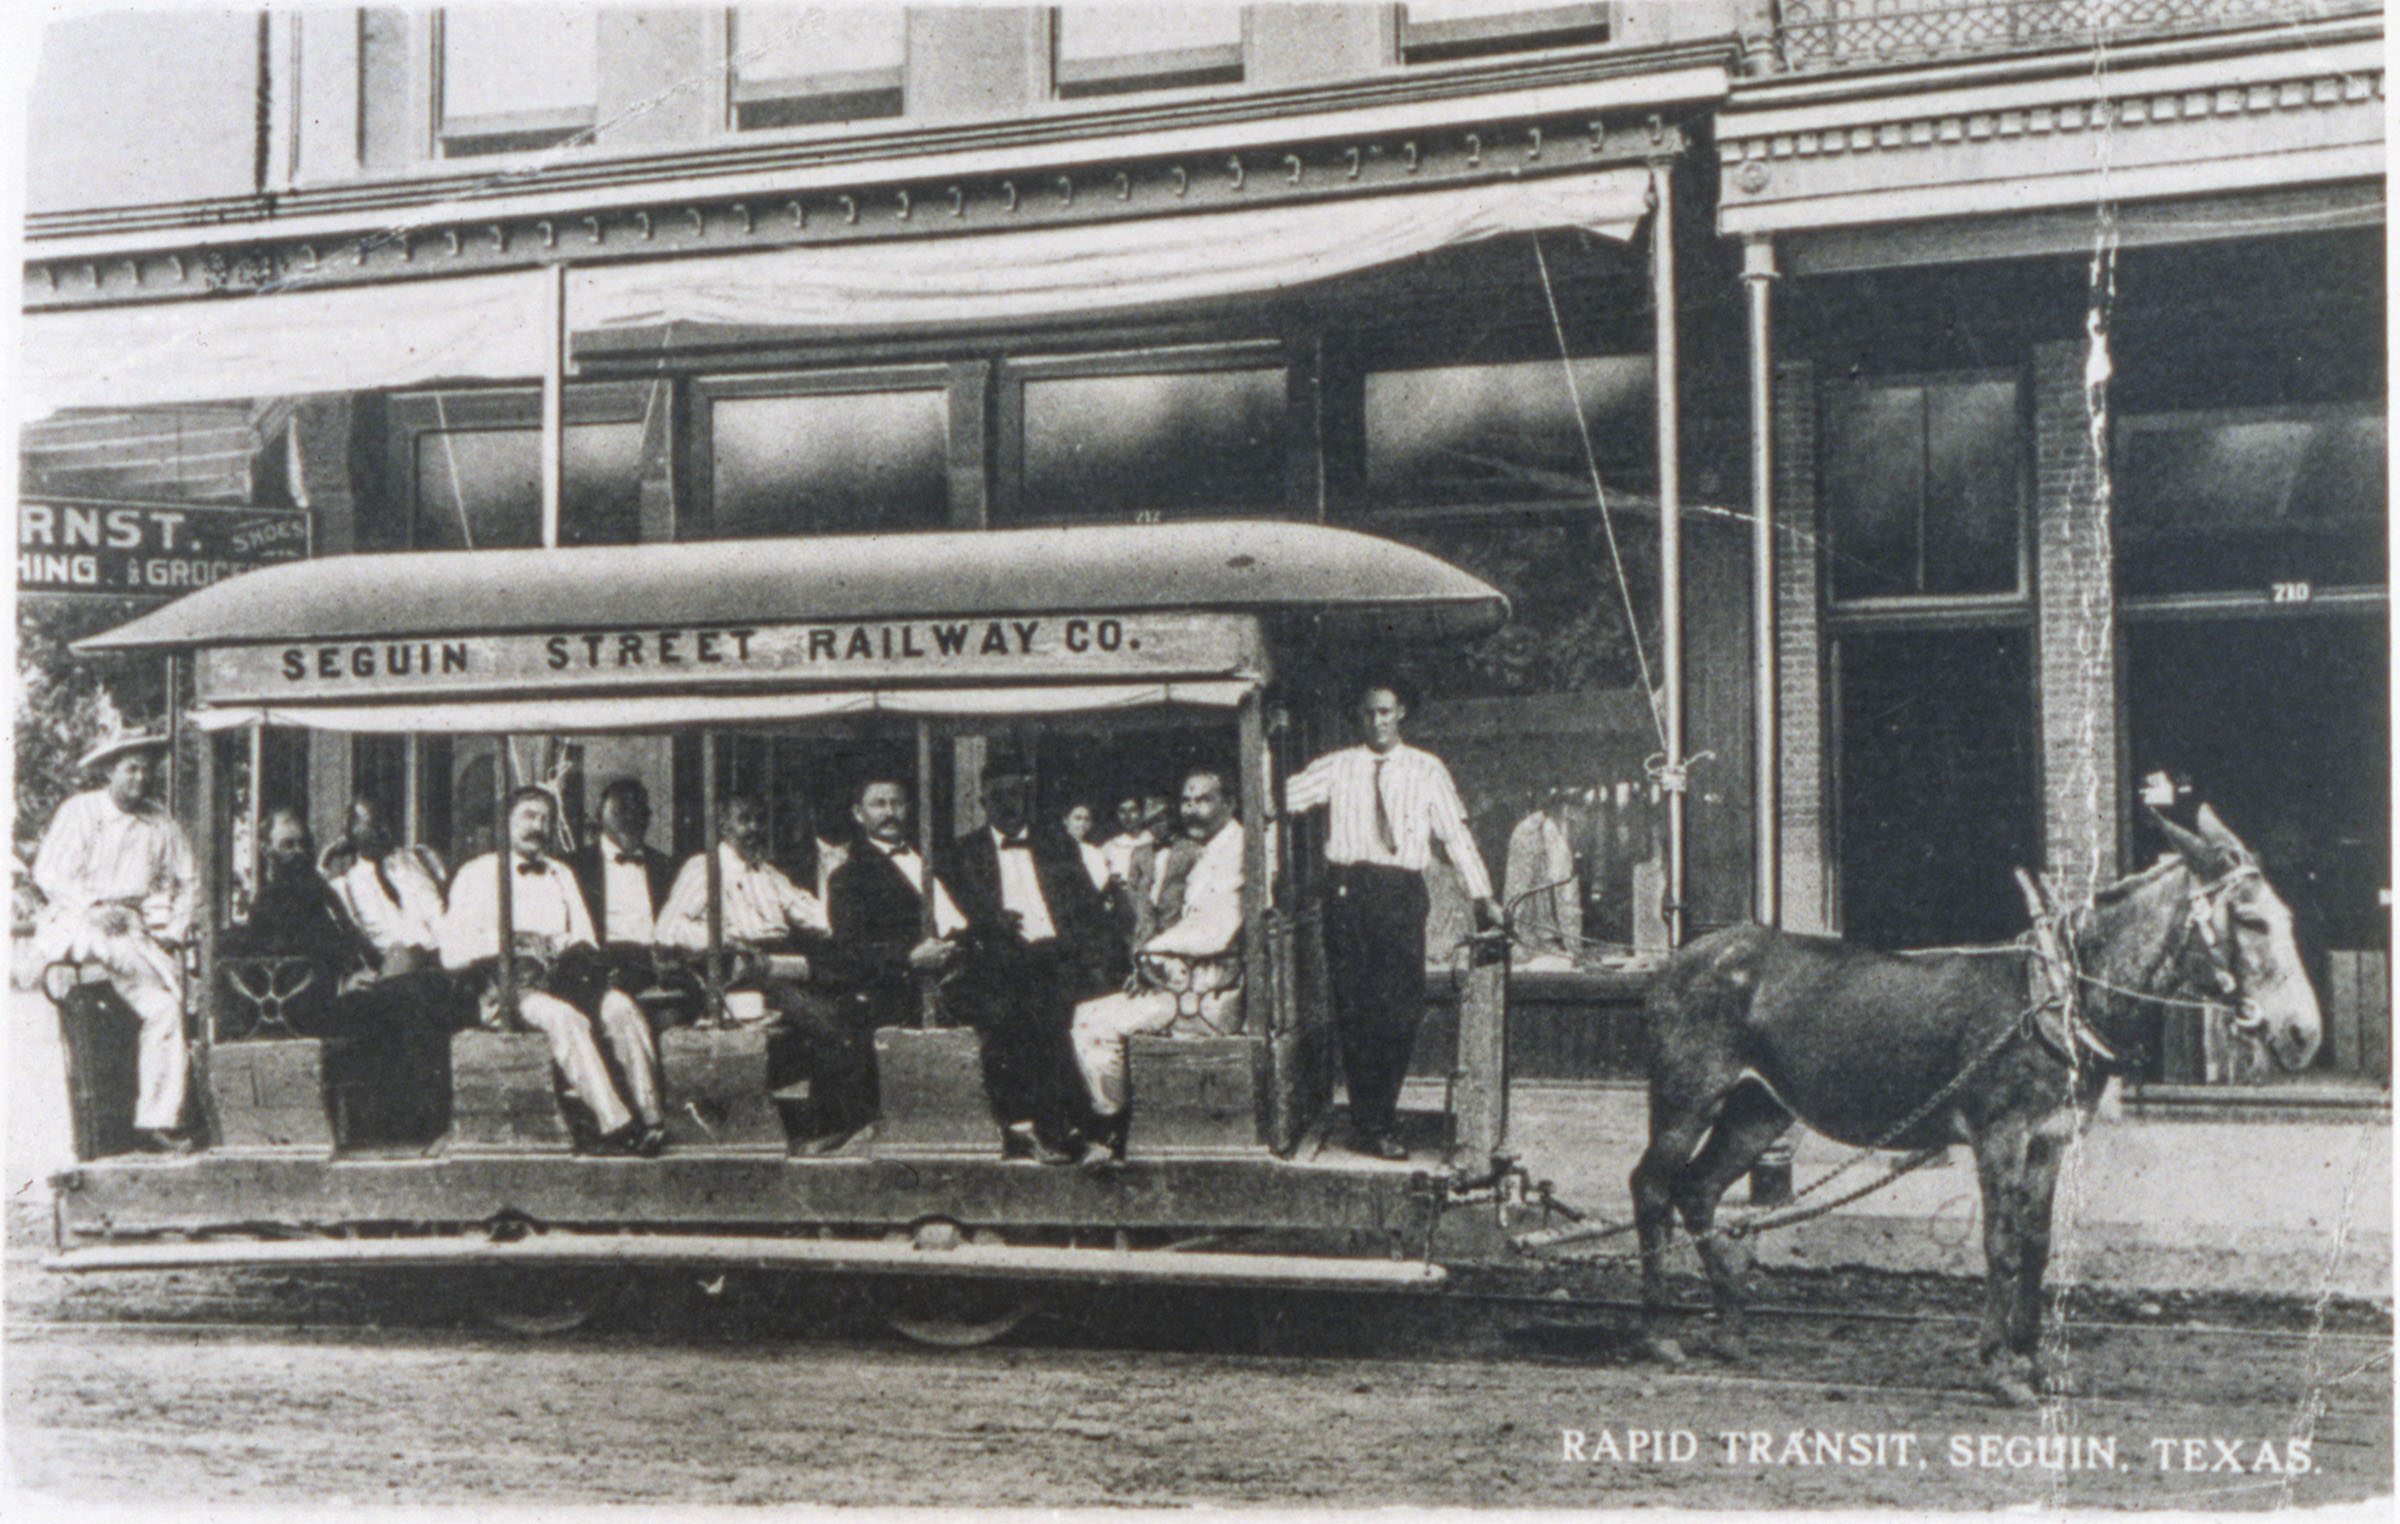 People dressed in shirts and ties sit on a streetcar in a historic photograph